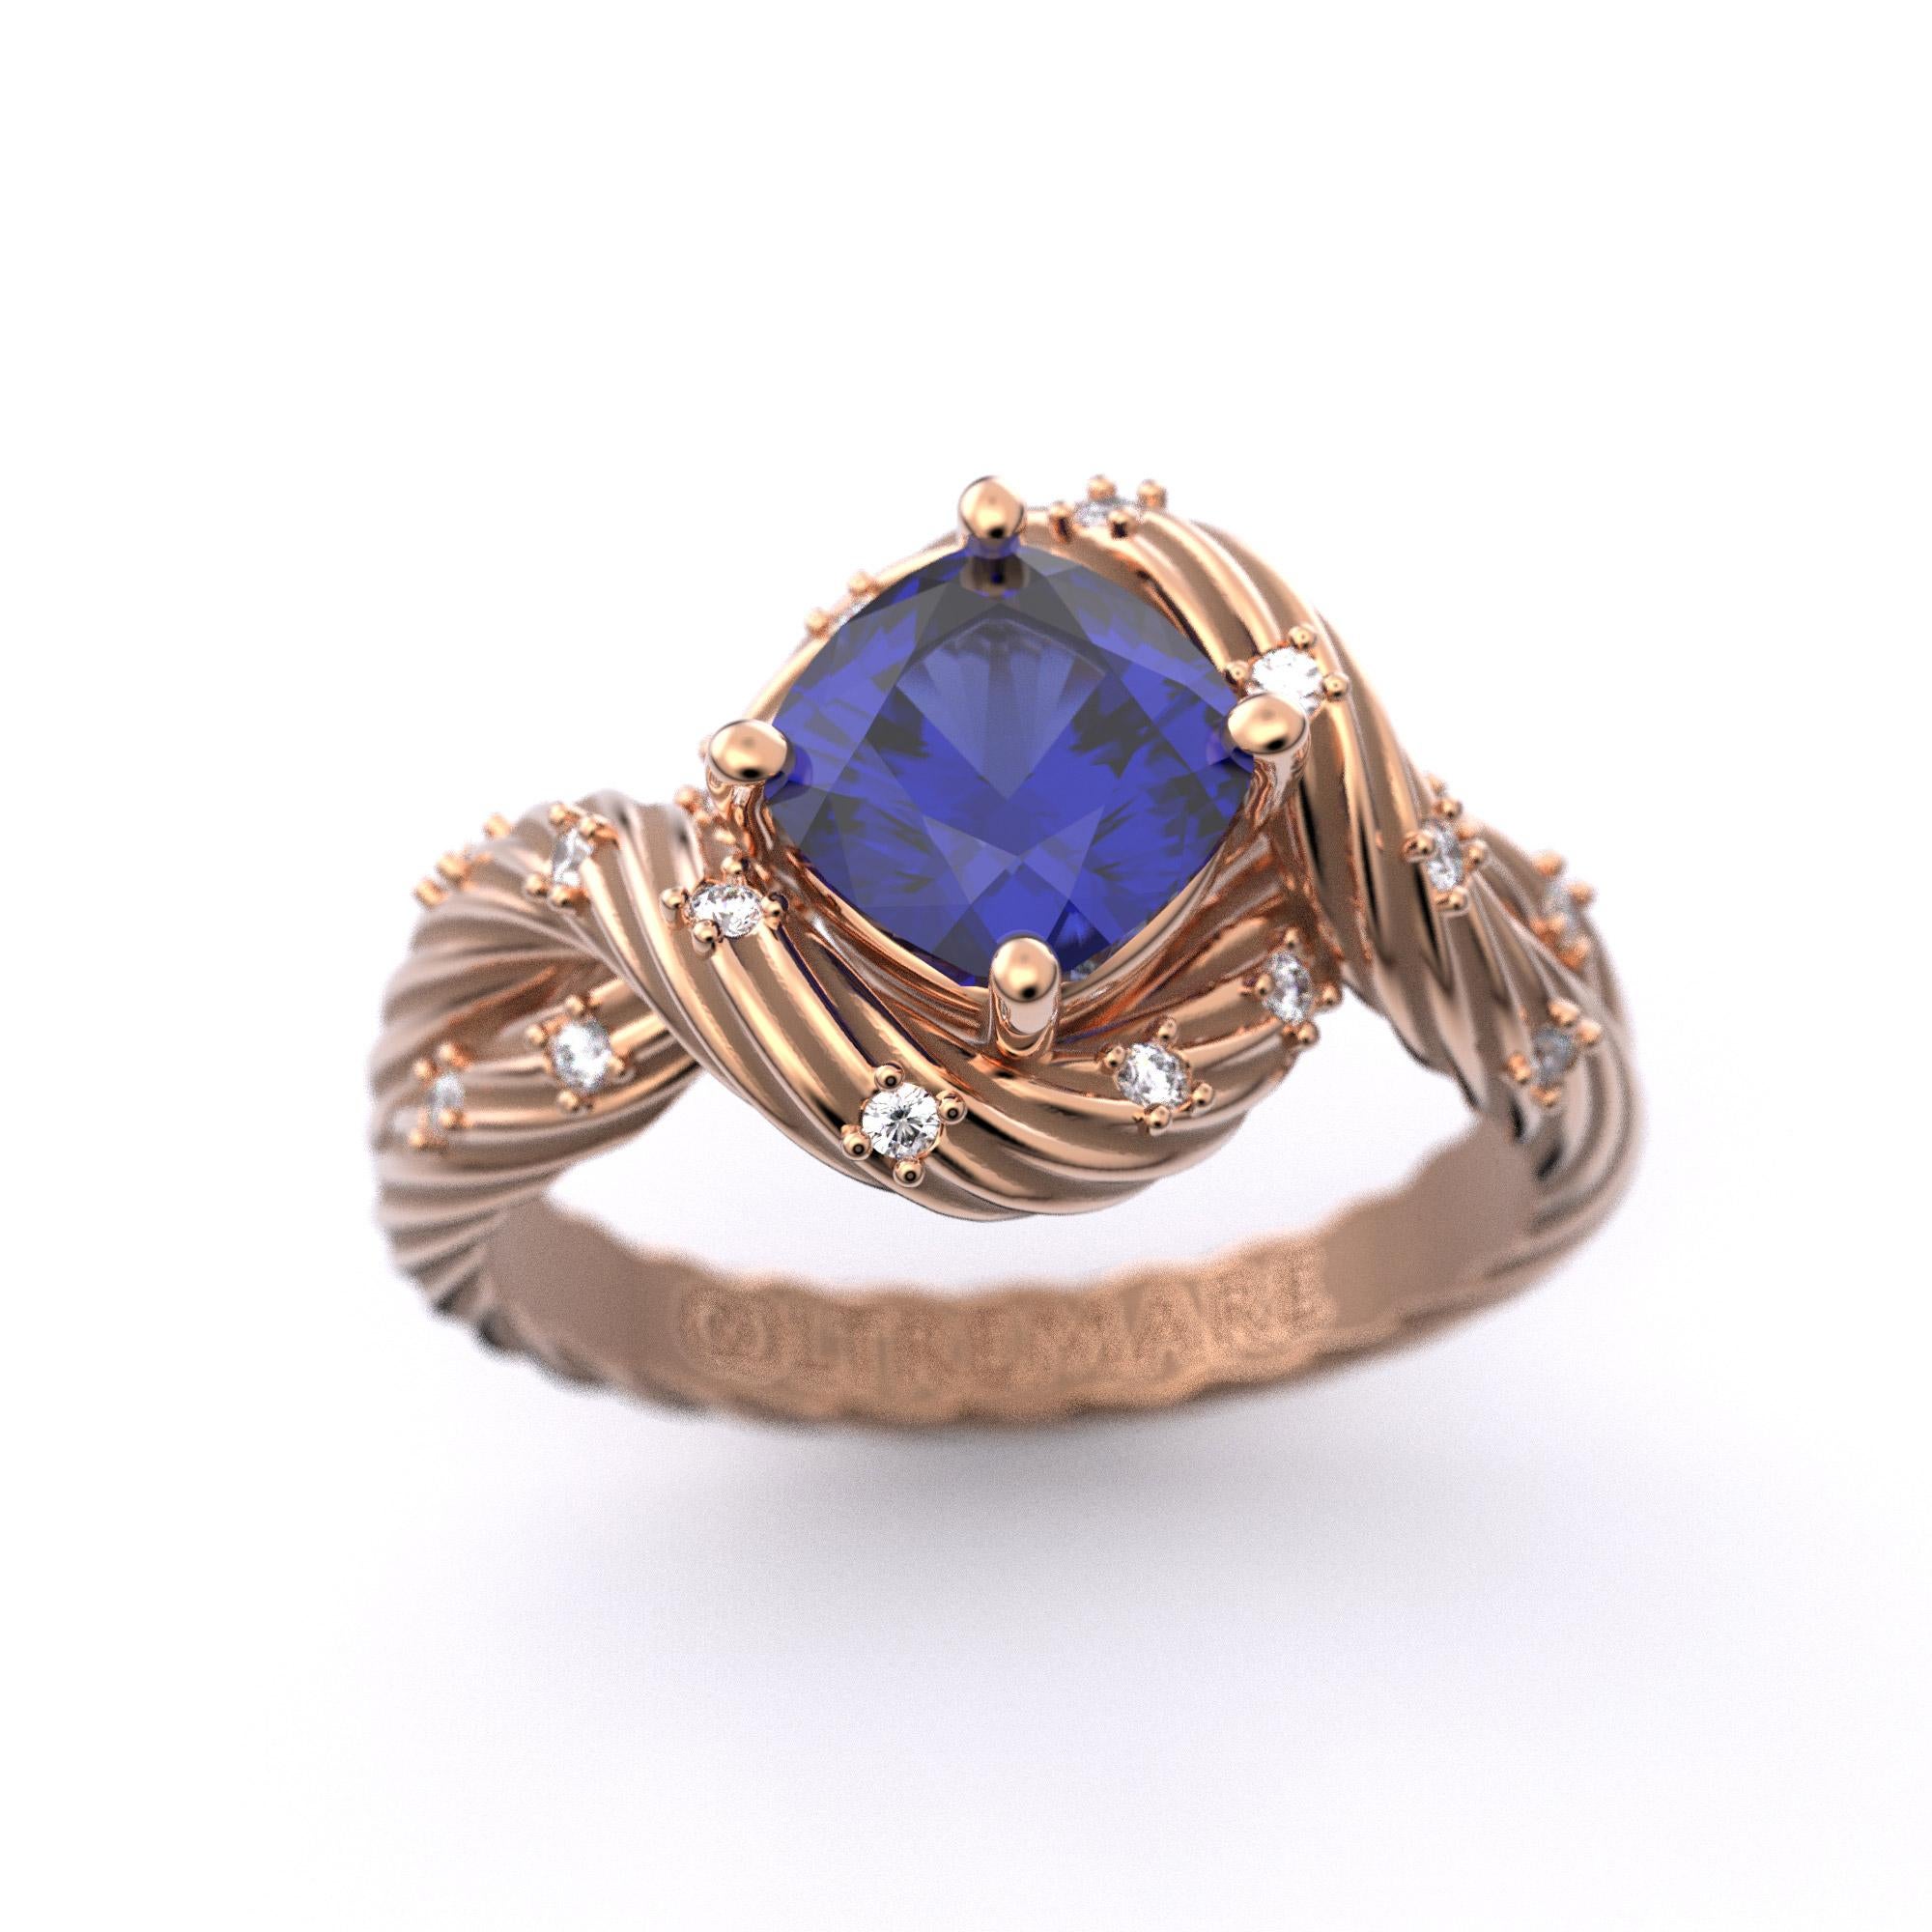 For Sale:  Tanzanite and Diamonds Ring 14k Solid Gold, Italian Fine Jewelry, made to order. 8